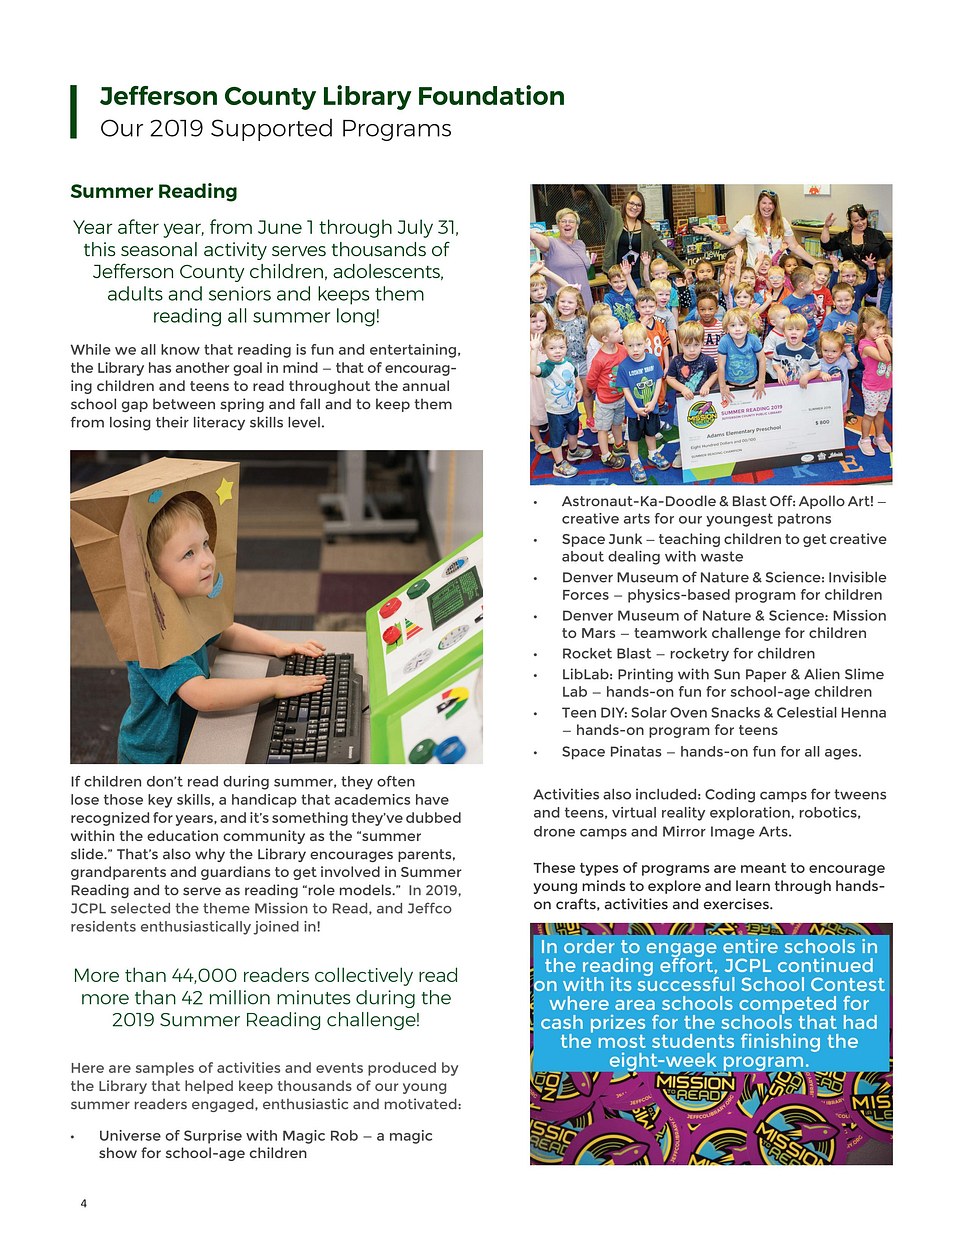 Annual Report Sample Page